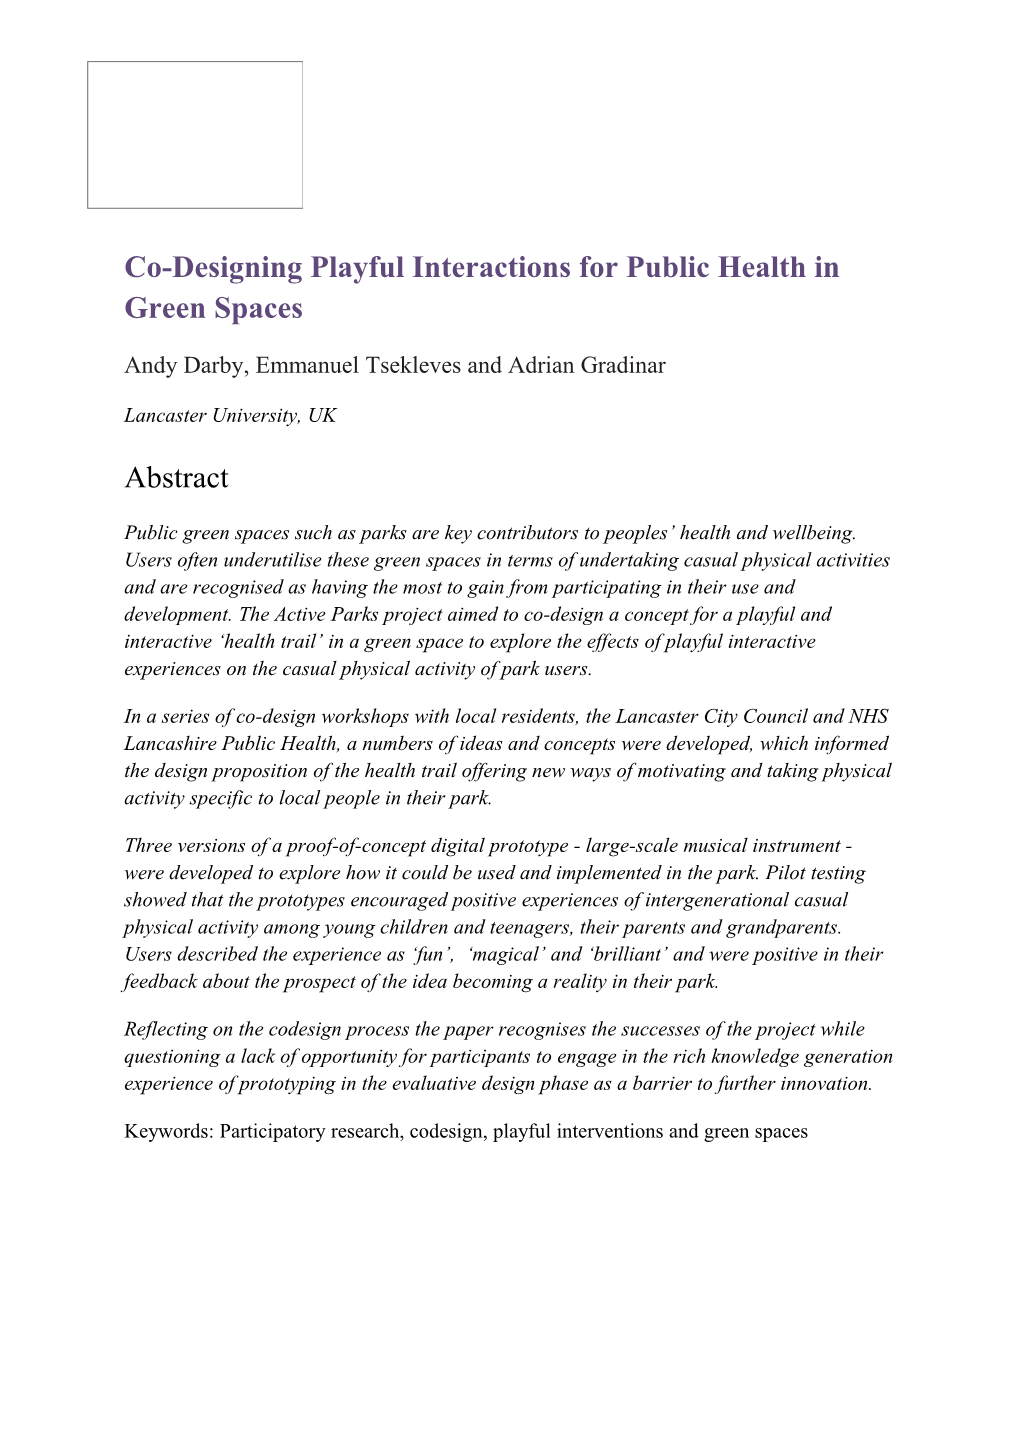 Co-Designing Playful Interactions for Public Health in Green Spaces